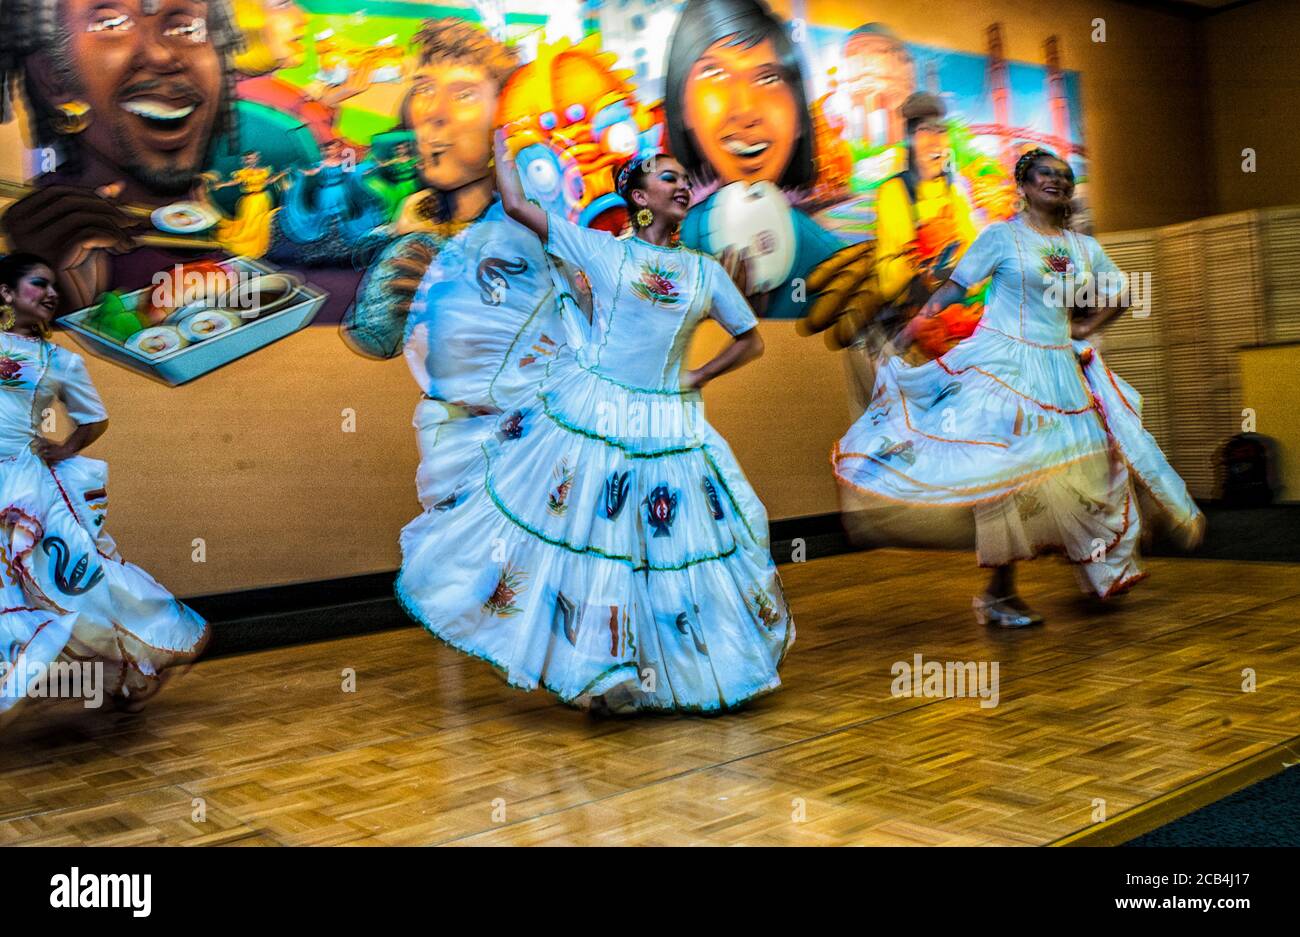 North America - United States, San Francisco: Young Latinos perform a traditional post-colonial dance as part of their Mexican heritage. Stock Photo